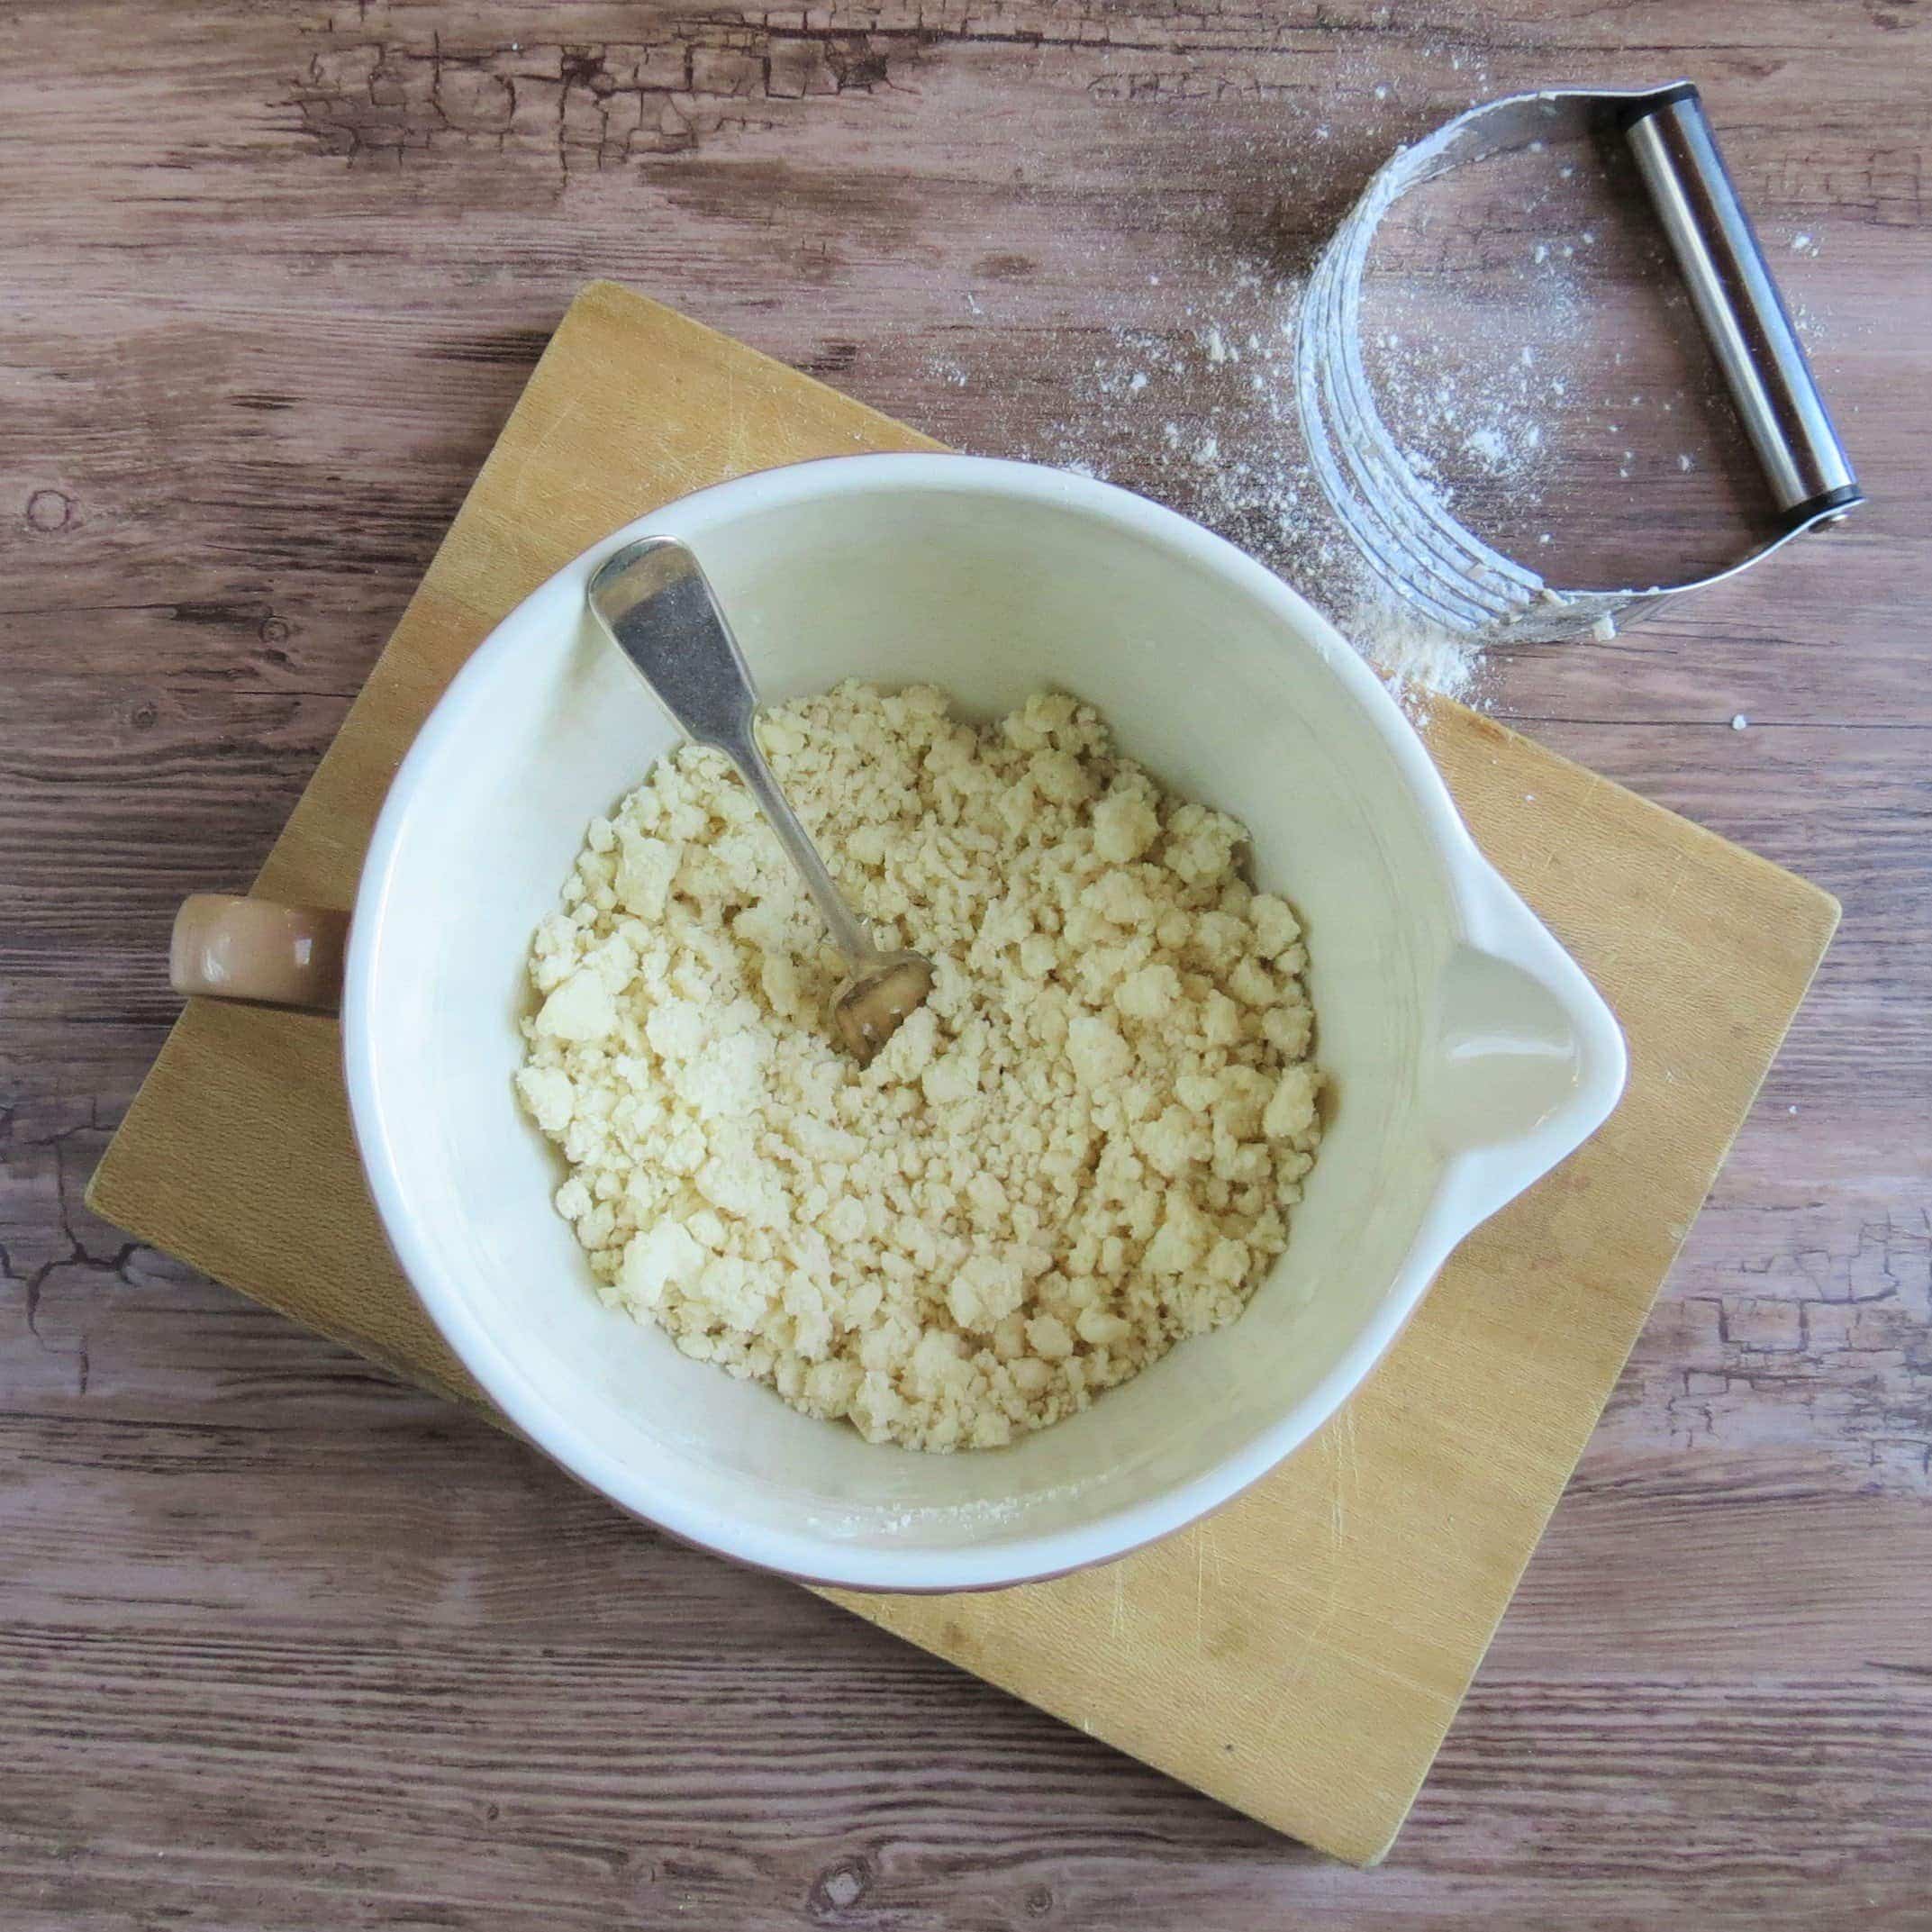 How to make Easy and Quick Gluten Free Suet with two ingredients